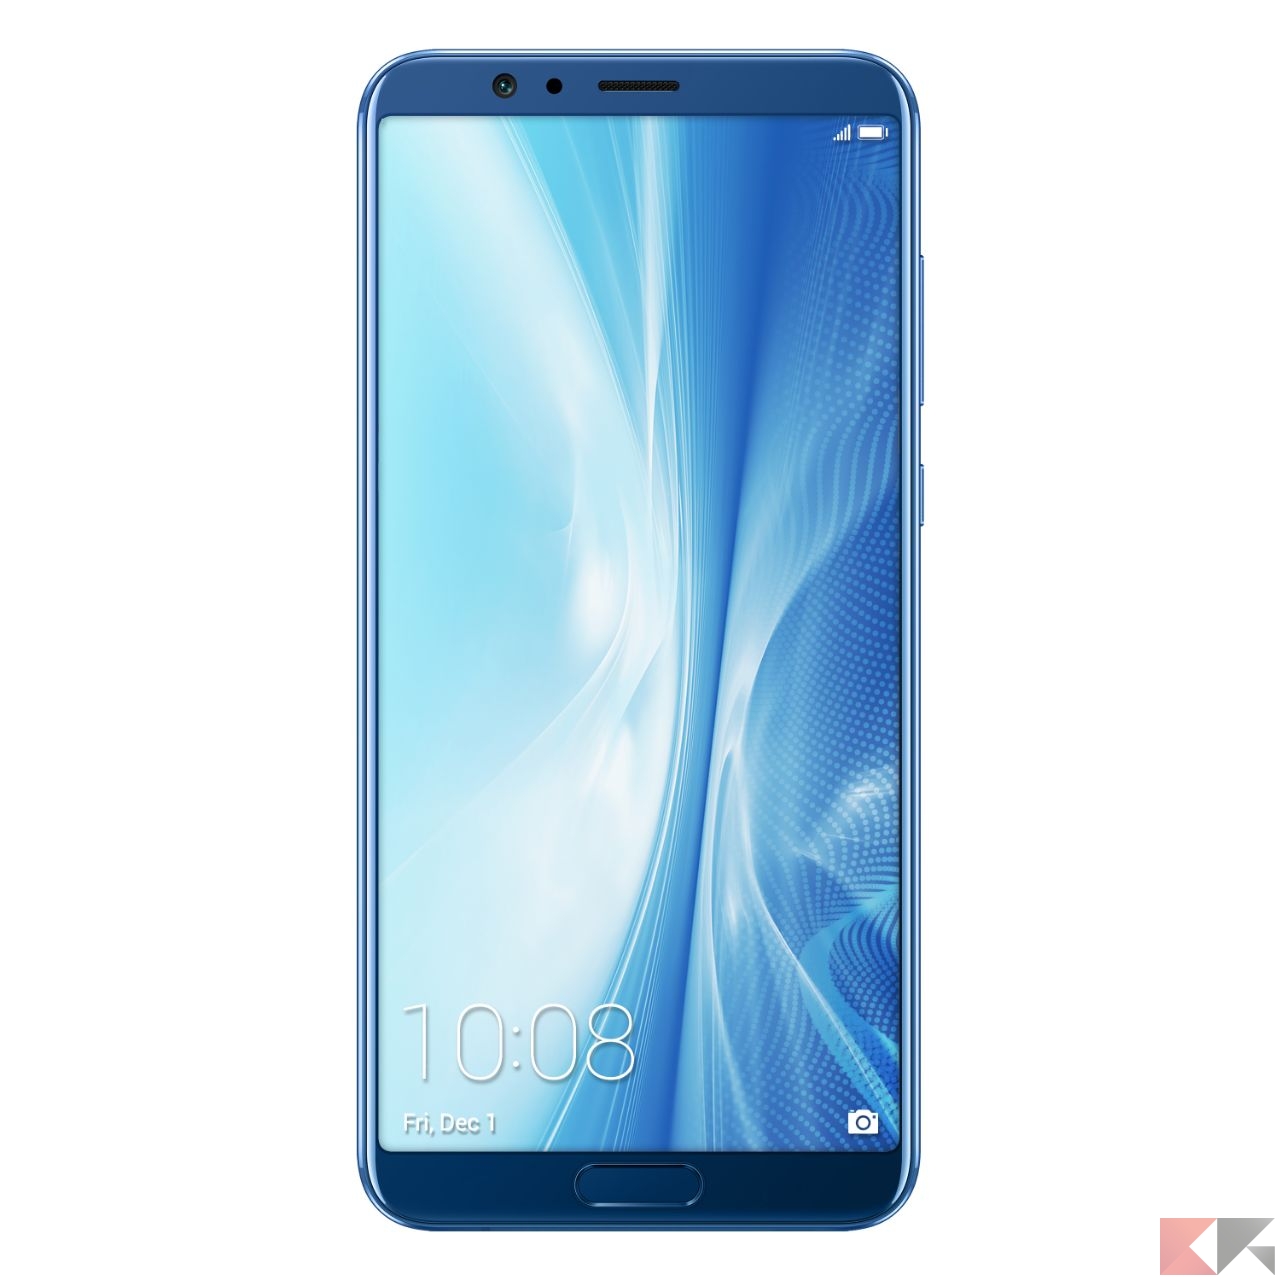 honor view 10